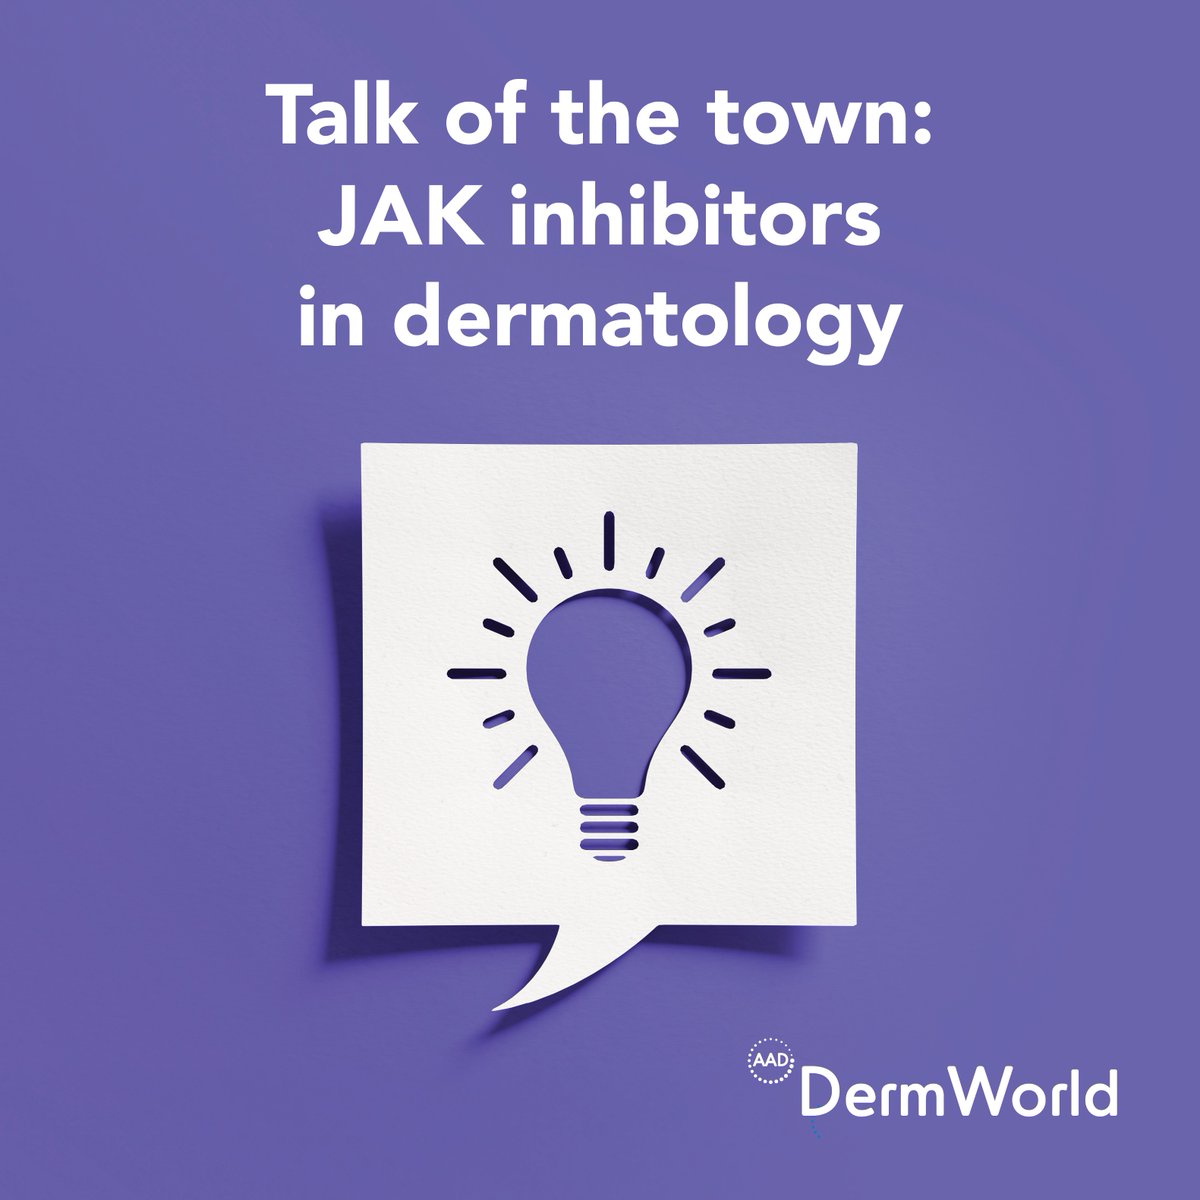 Dermatologists discuss the influx of new #JAKinhibitors in #dermatology and how they are breaking new ground for the specialty in #DermWorld. aad.org/dw/monthly/202…